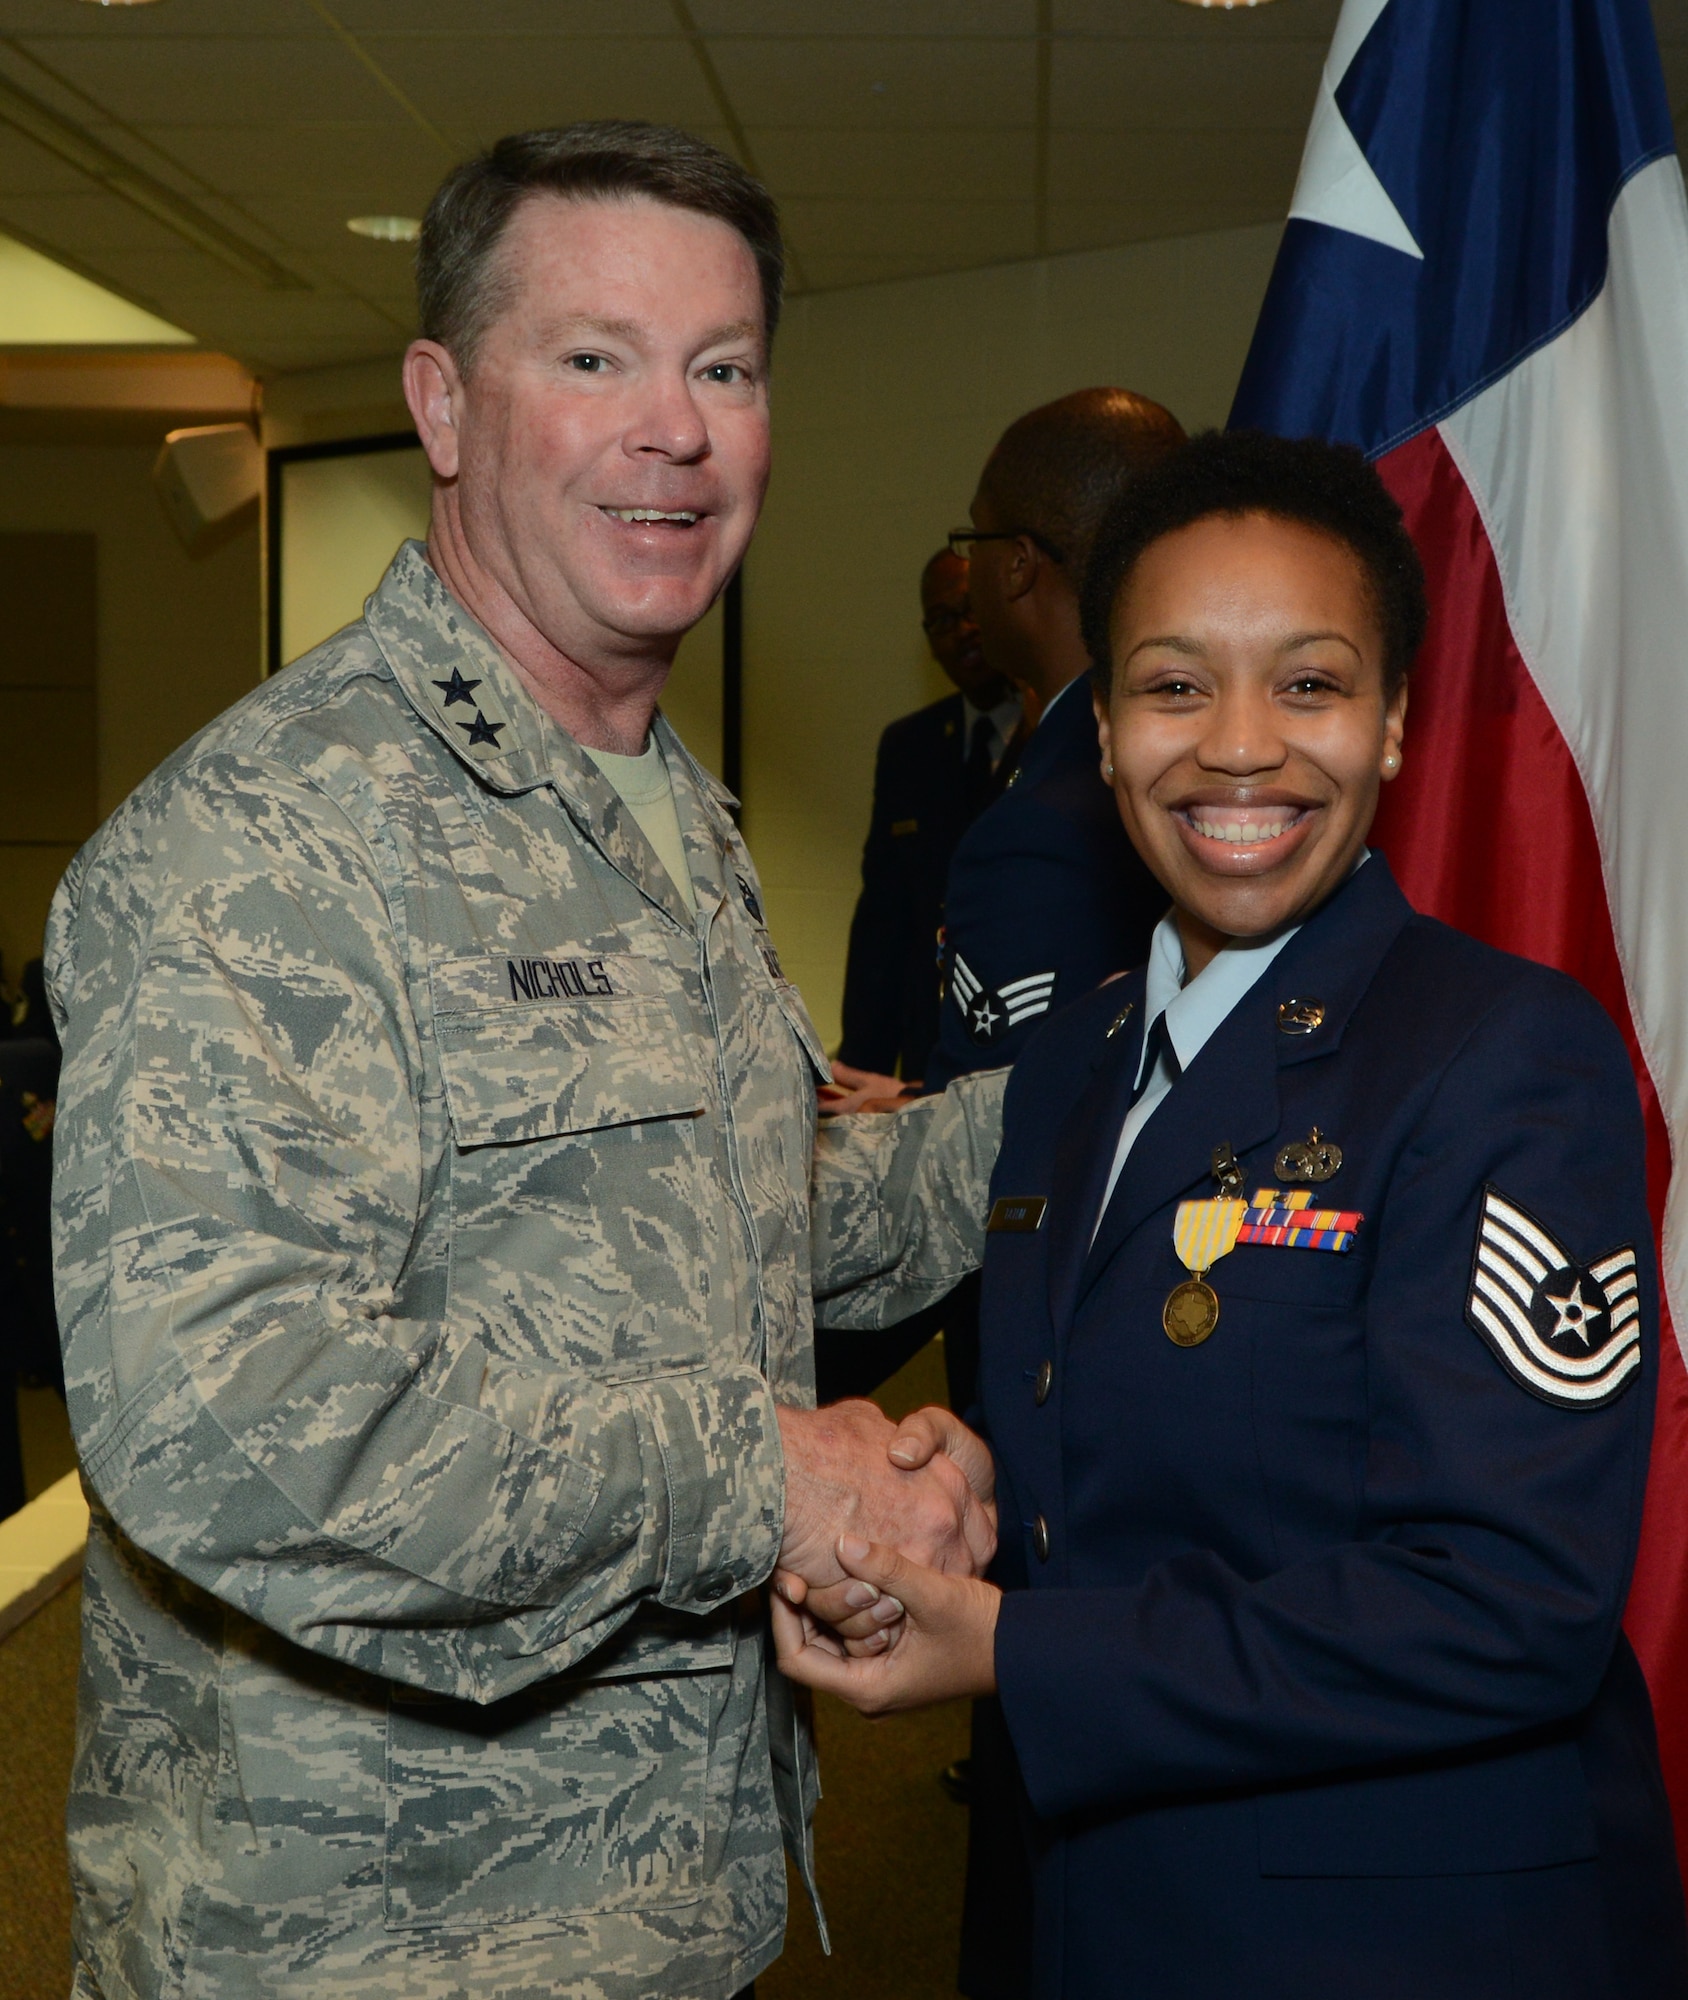 Major Gen. John Nichols, Adjutant General for the State of Texas congratulates Tech. Sgt. Carolyn Tatum, 136th Air Lift Wing, Non Commissioned Officer of the Year for Texas, at Camp Mabry, Jan.13, 2013. Tatum continues on for the State in the national competition, competing against active duty Air Force and Reserves. (National Guard photo by Senior Master Sgt. Elizabeth Gilbert)